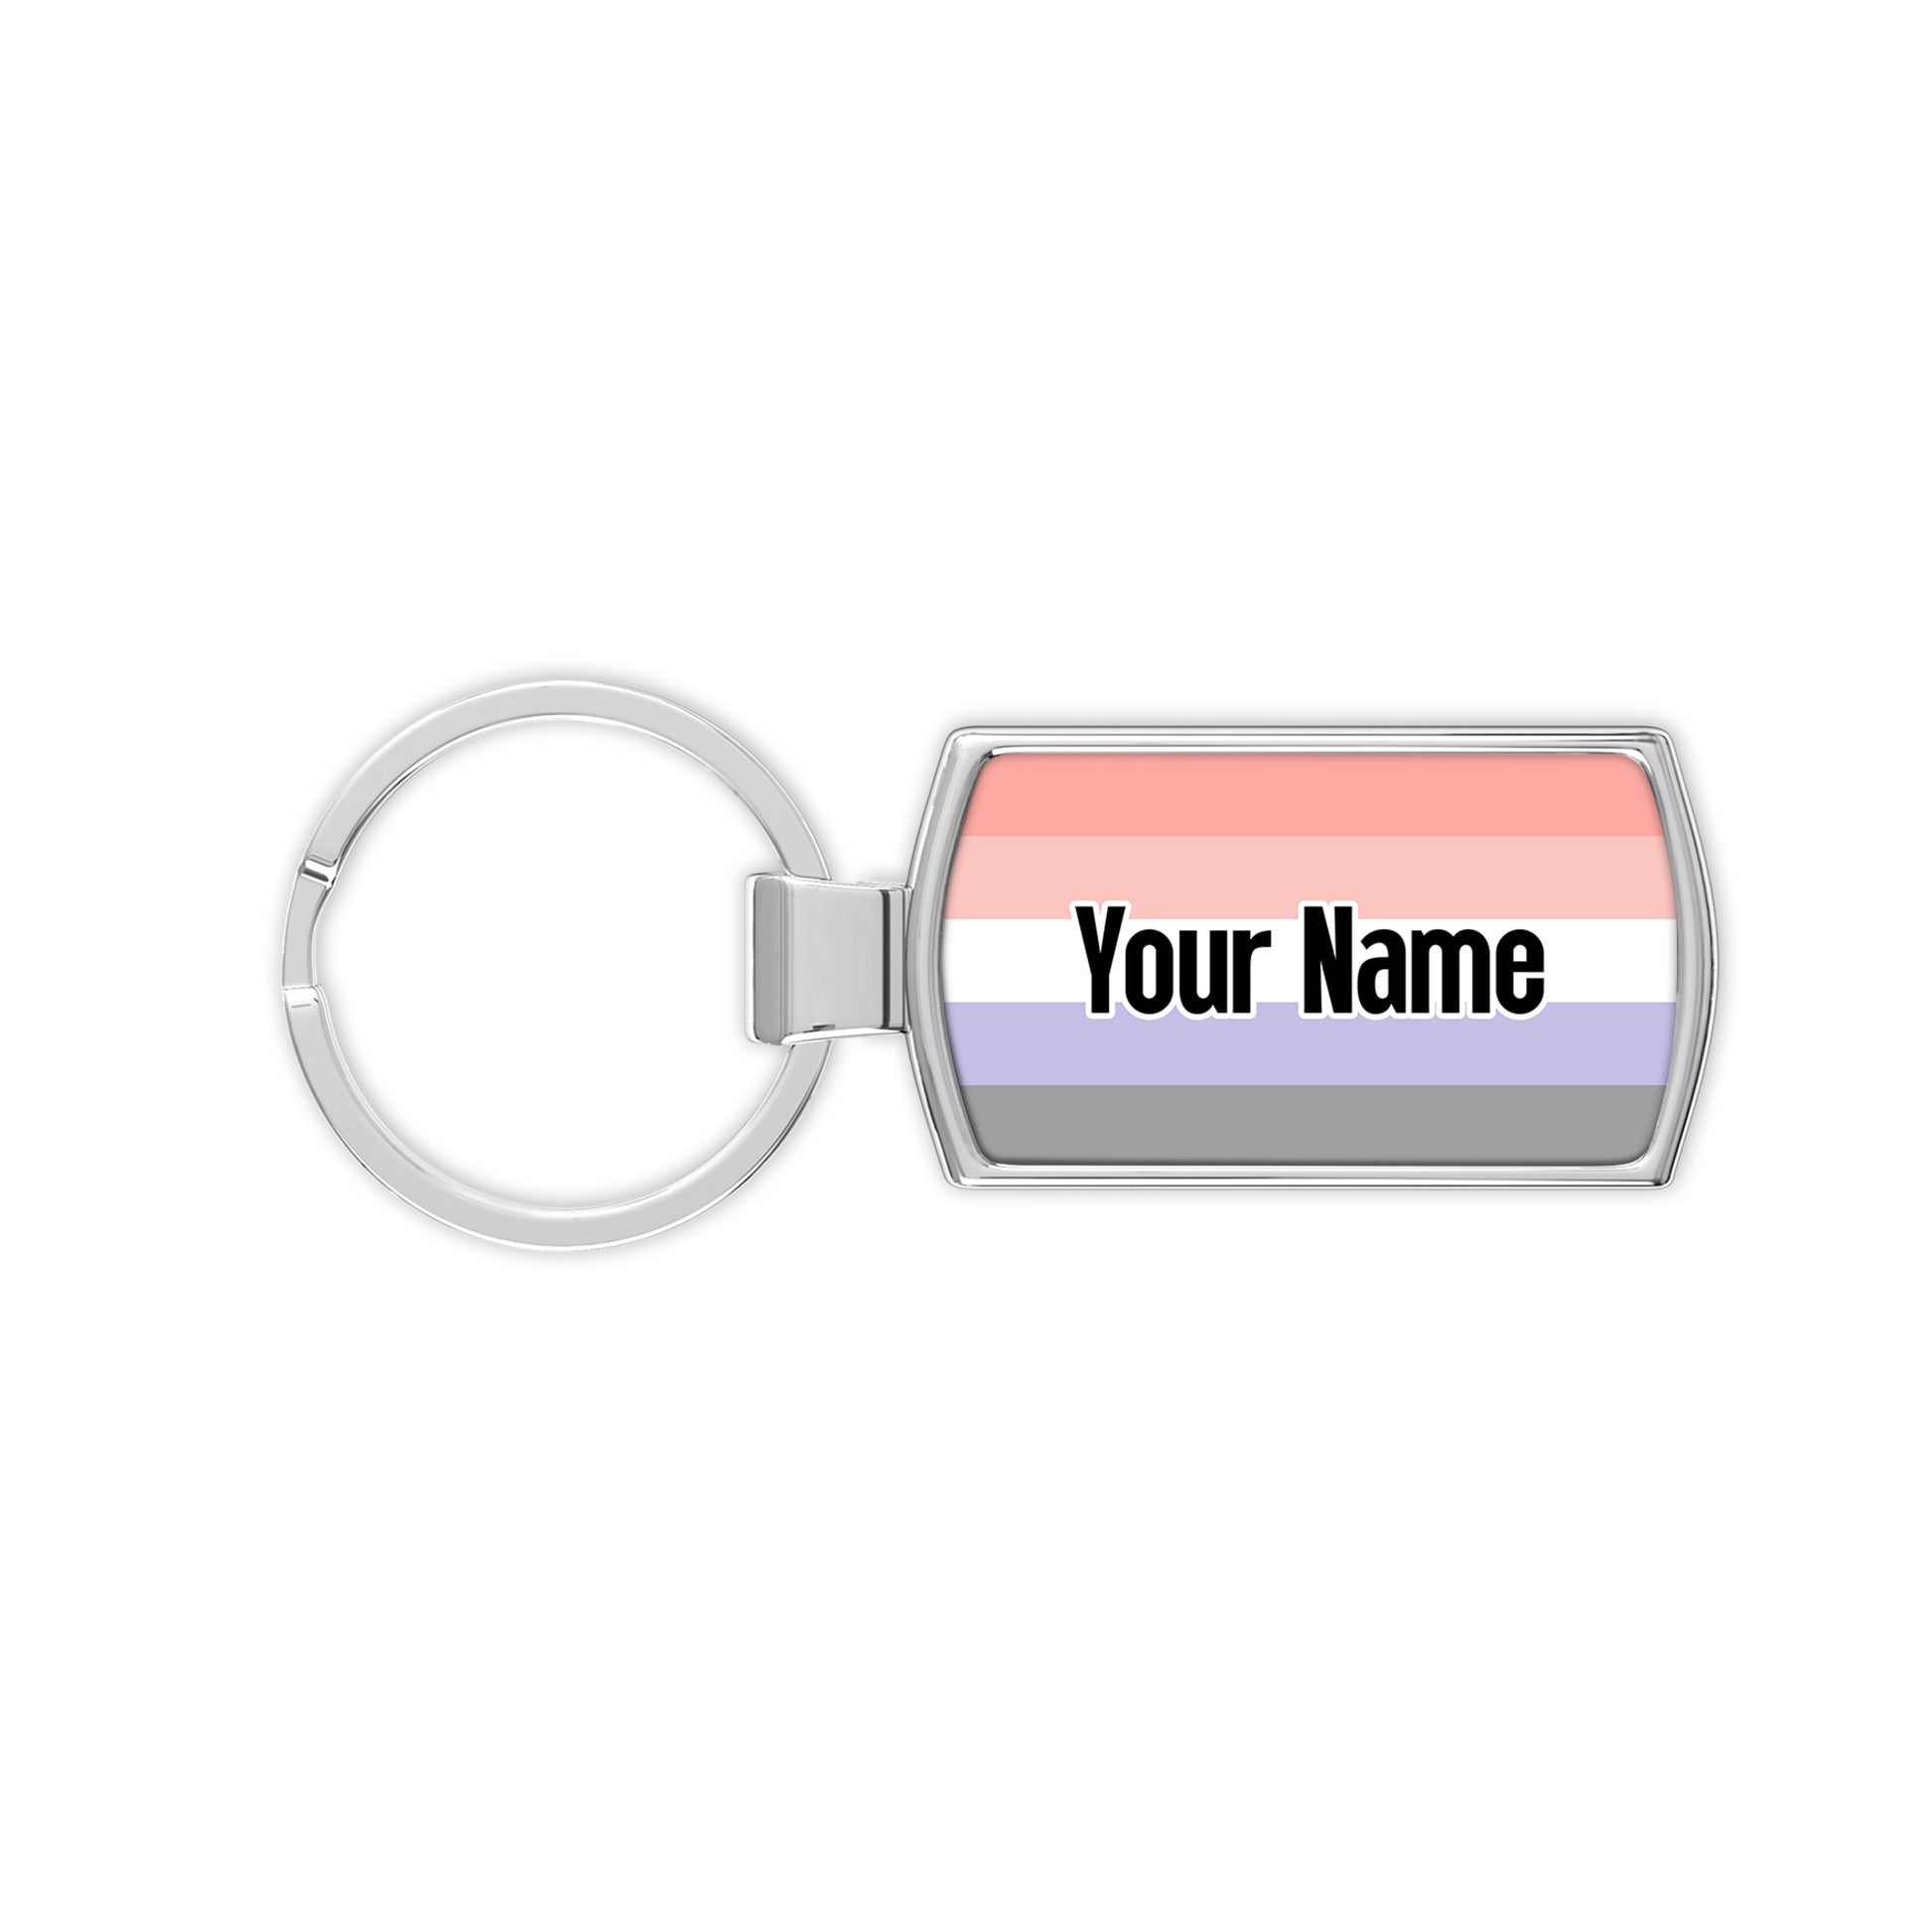 Cupioromantic pride flag metal keychain that comes personalised with your name